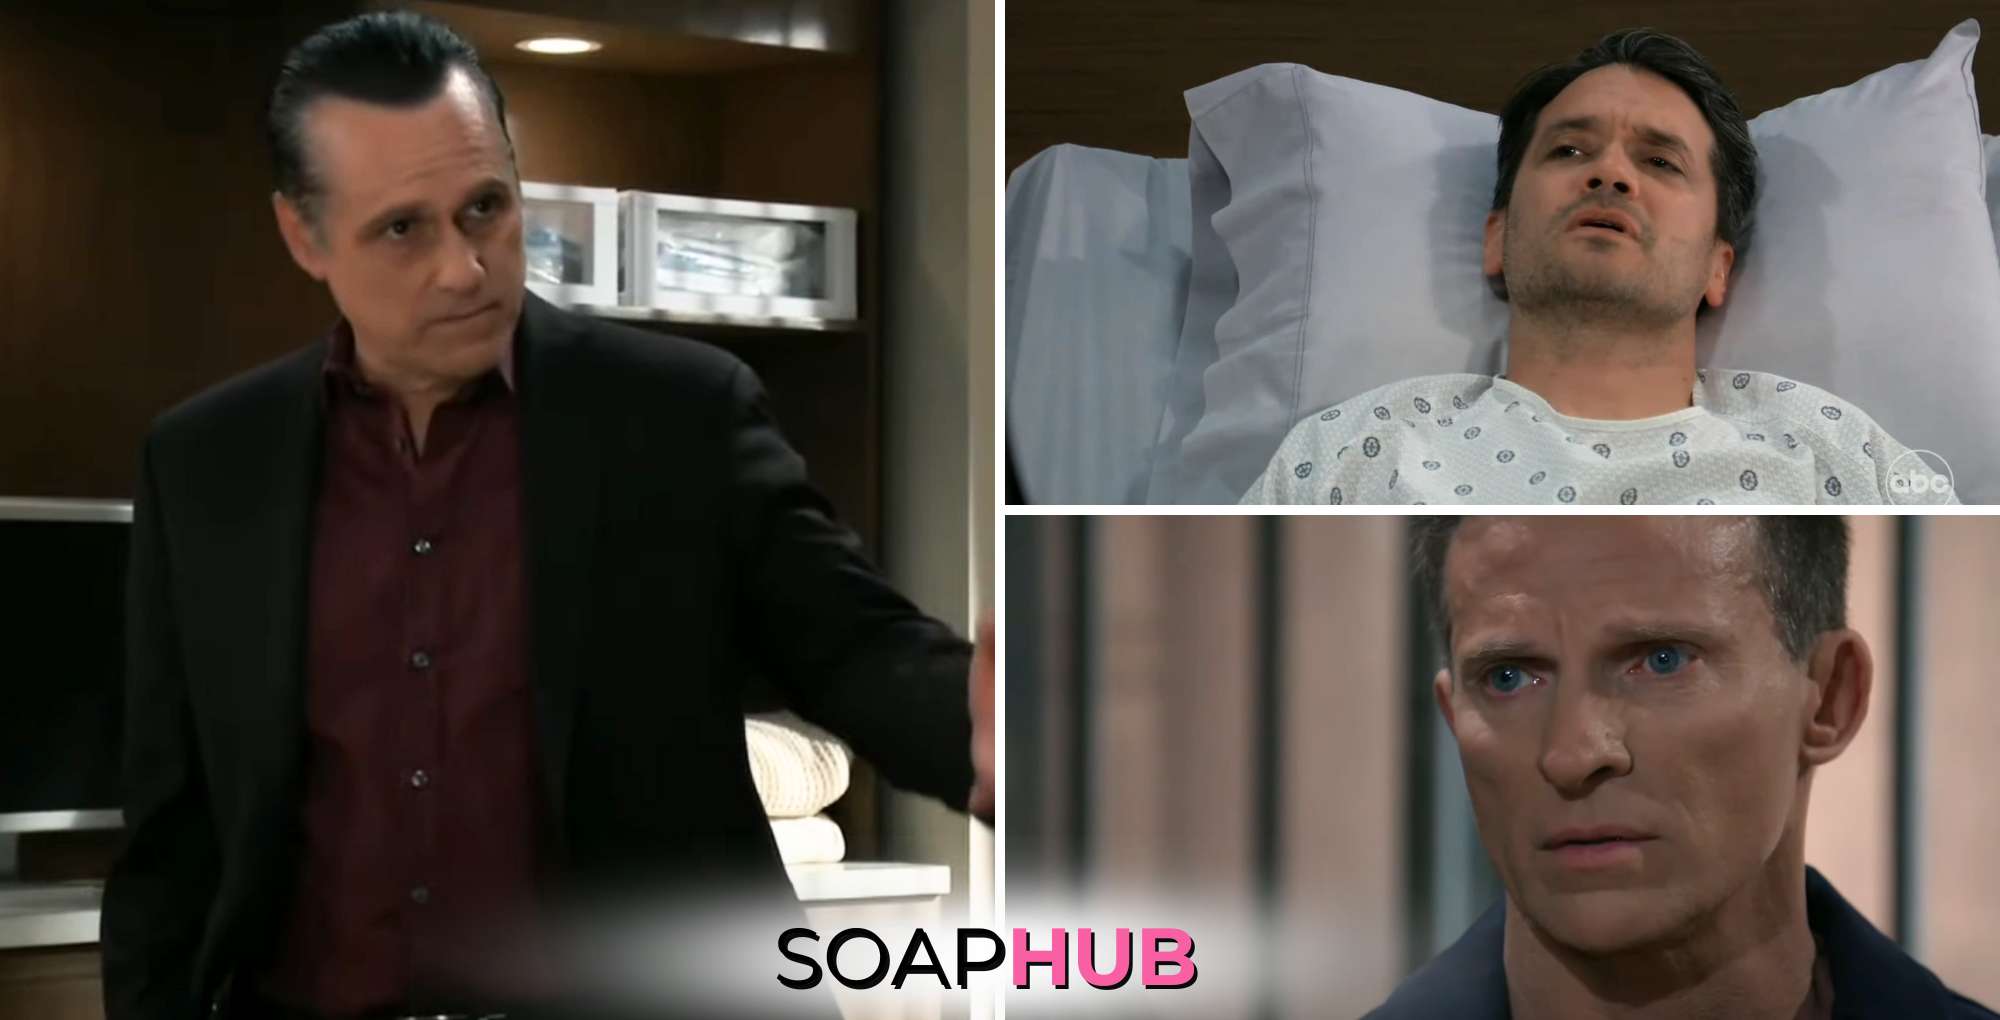 General Hospital for April 1 featured Sonny, Dante, and Jason.